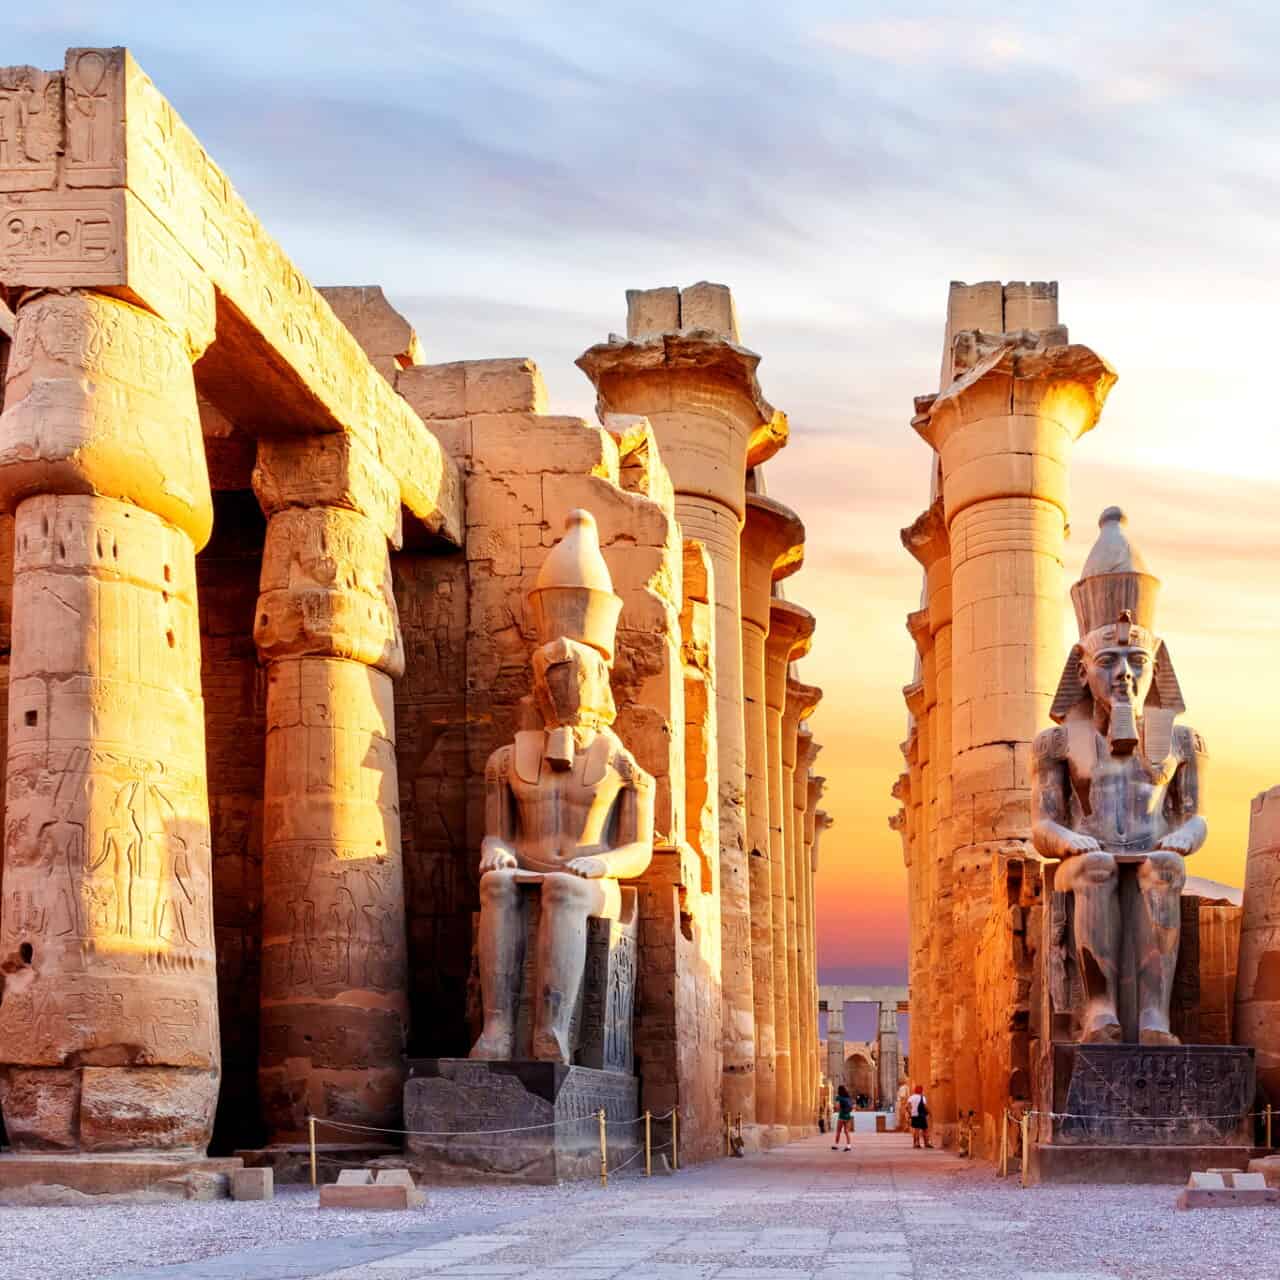 First pylon view of Luxor Temple in Egypt